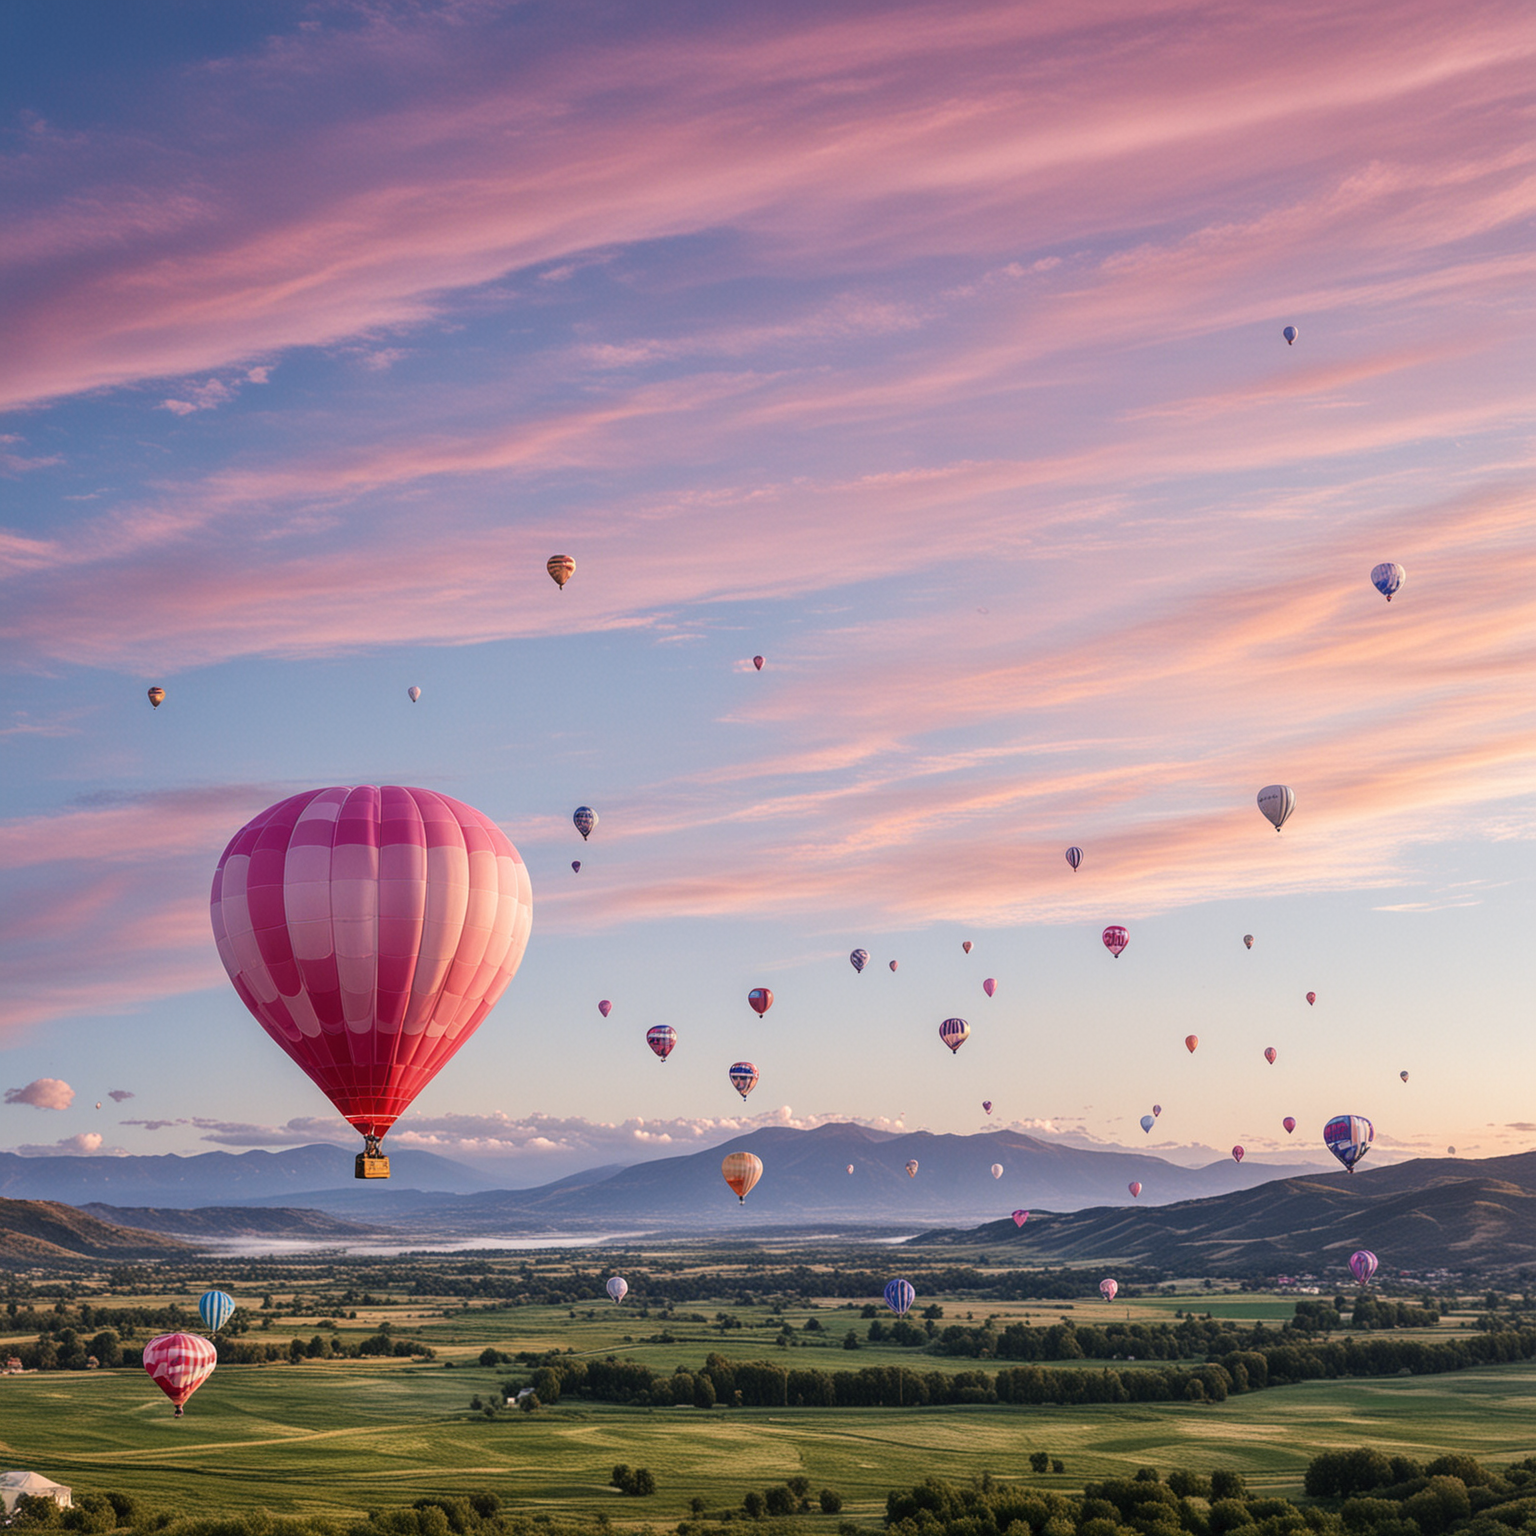 Pink and White Hot Air Balloon Floating in Blue Sky over Green Hills